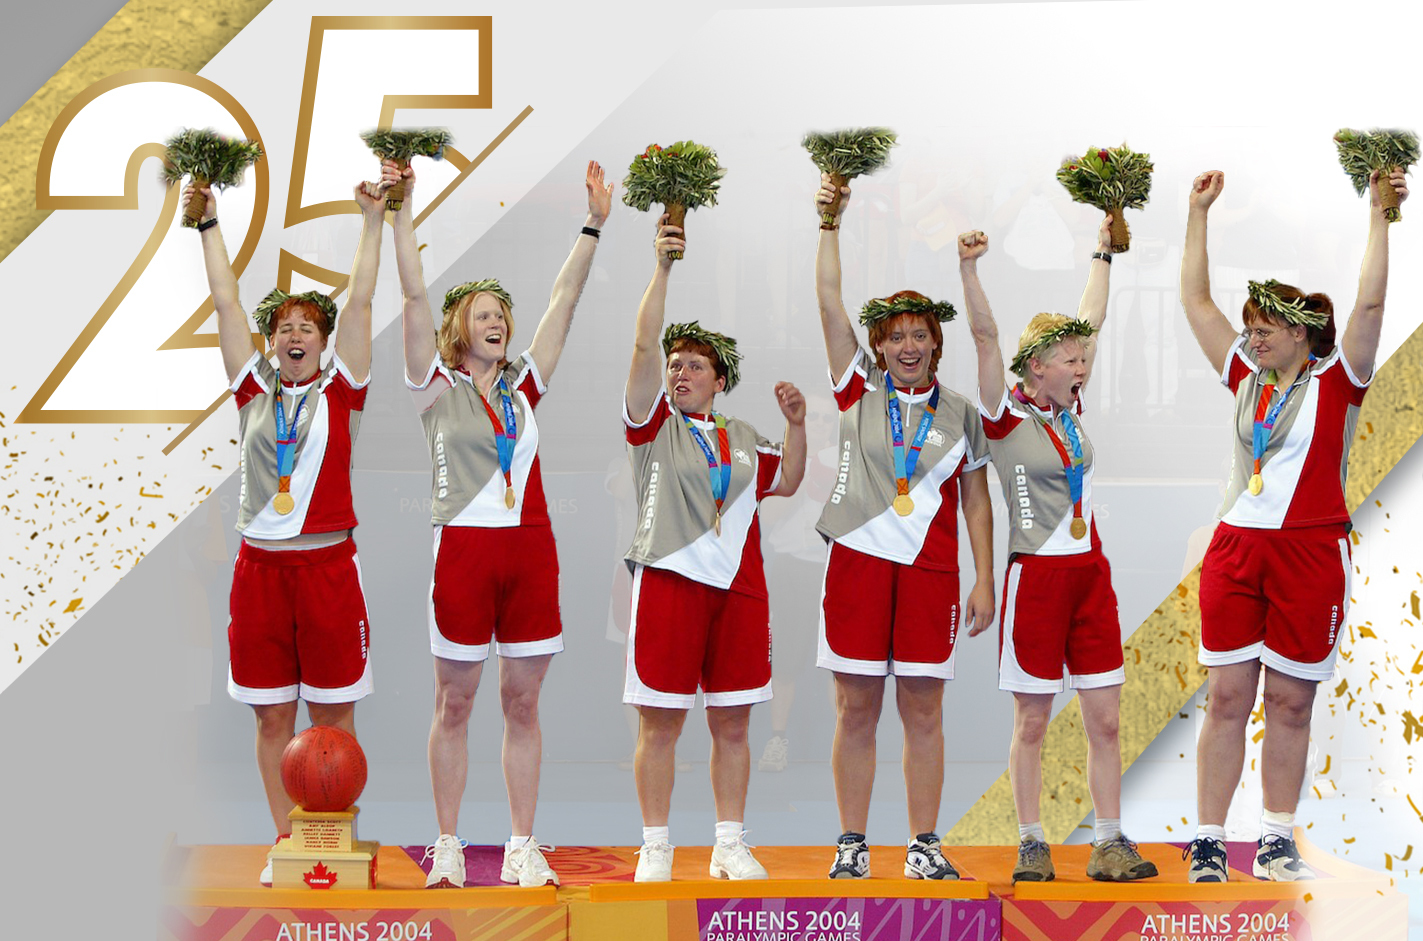 6 athletes in athletes on podium with arms in the air, gold confetti falling and 25 years in the corner of the image